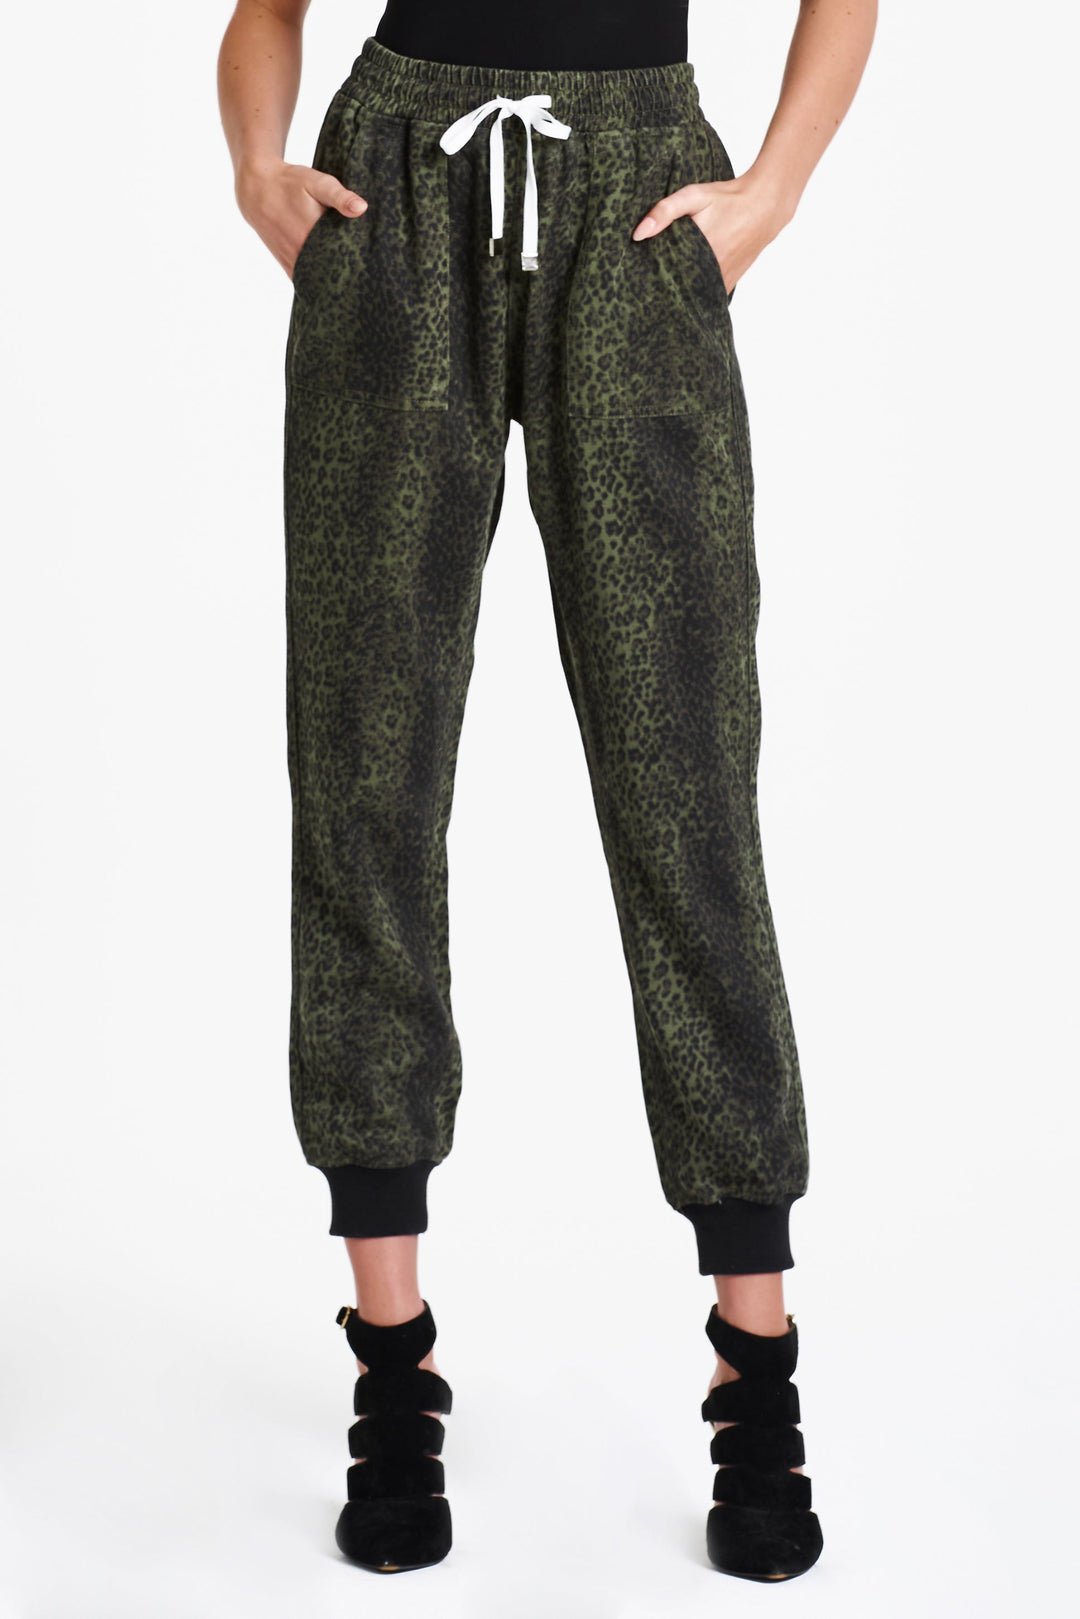 Jyeity Save Lots Of Time, Athletic Cropped Pants Floral Printing Elastic  Waist Beach Pants Try Before You Buy Womens Pants Green Size 5XL(US:18) 